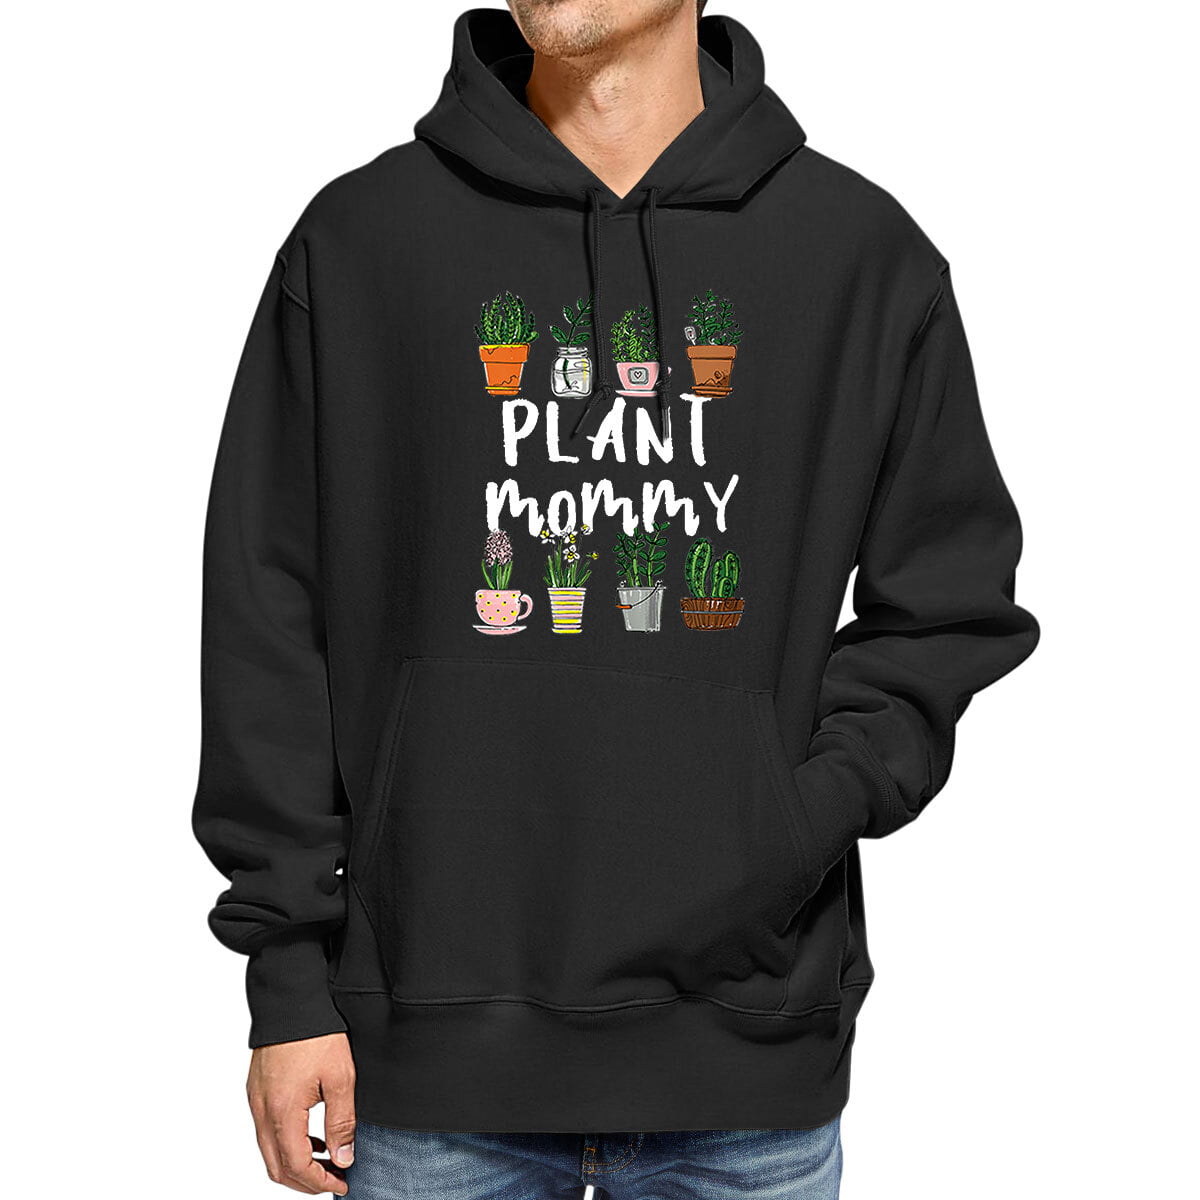 Funny Gift Birthday Awesome Tee Mom Dietary Manager Nothing Scares Me Halloween Zip Hooded Sweatshirt